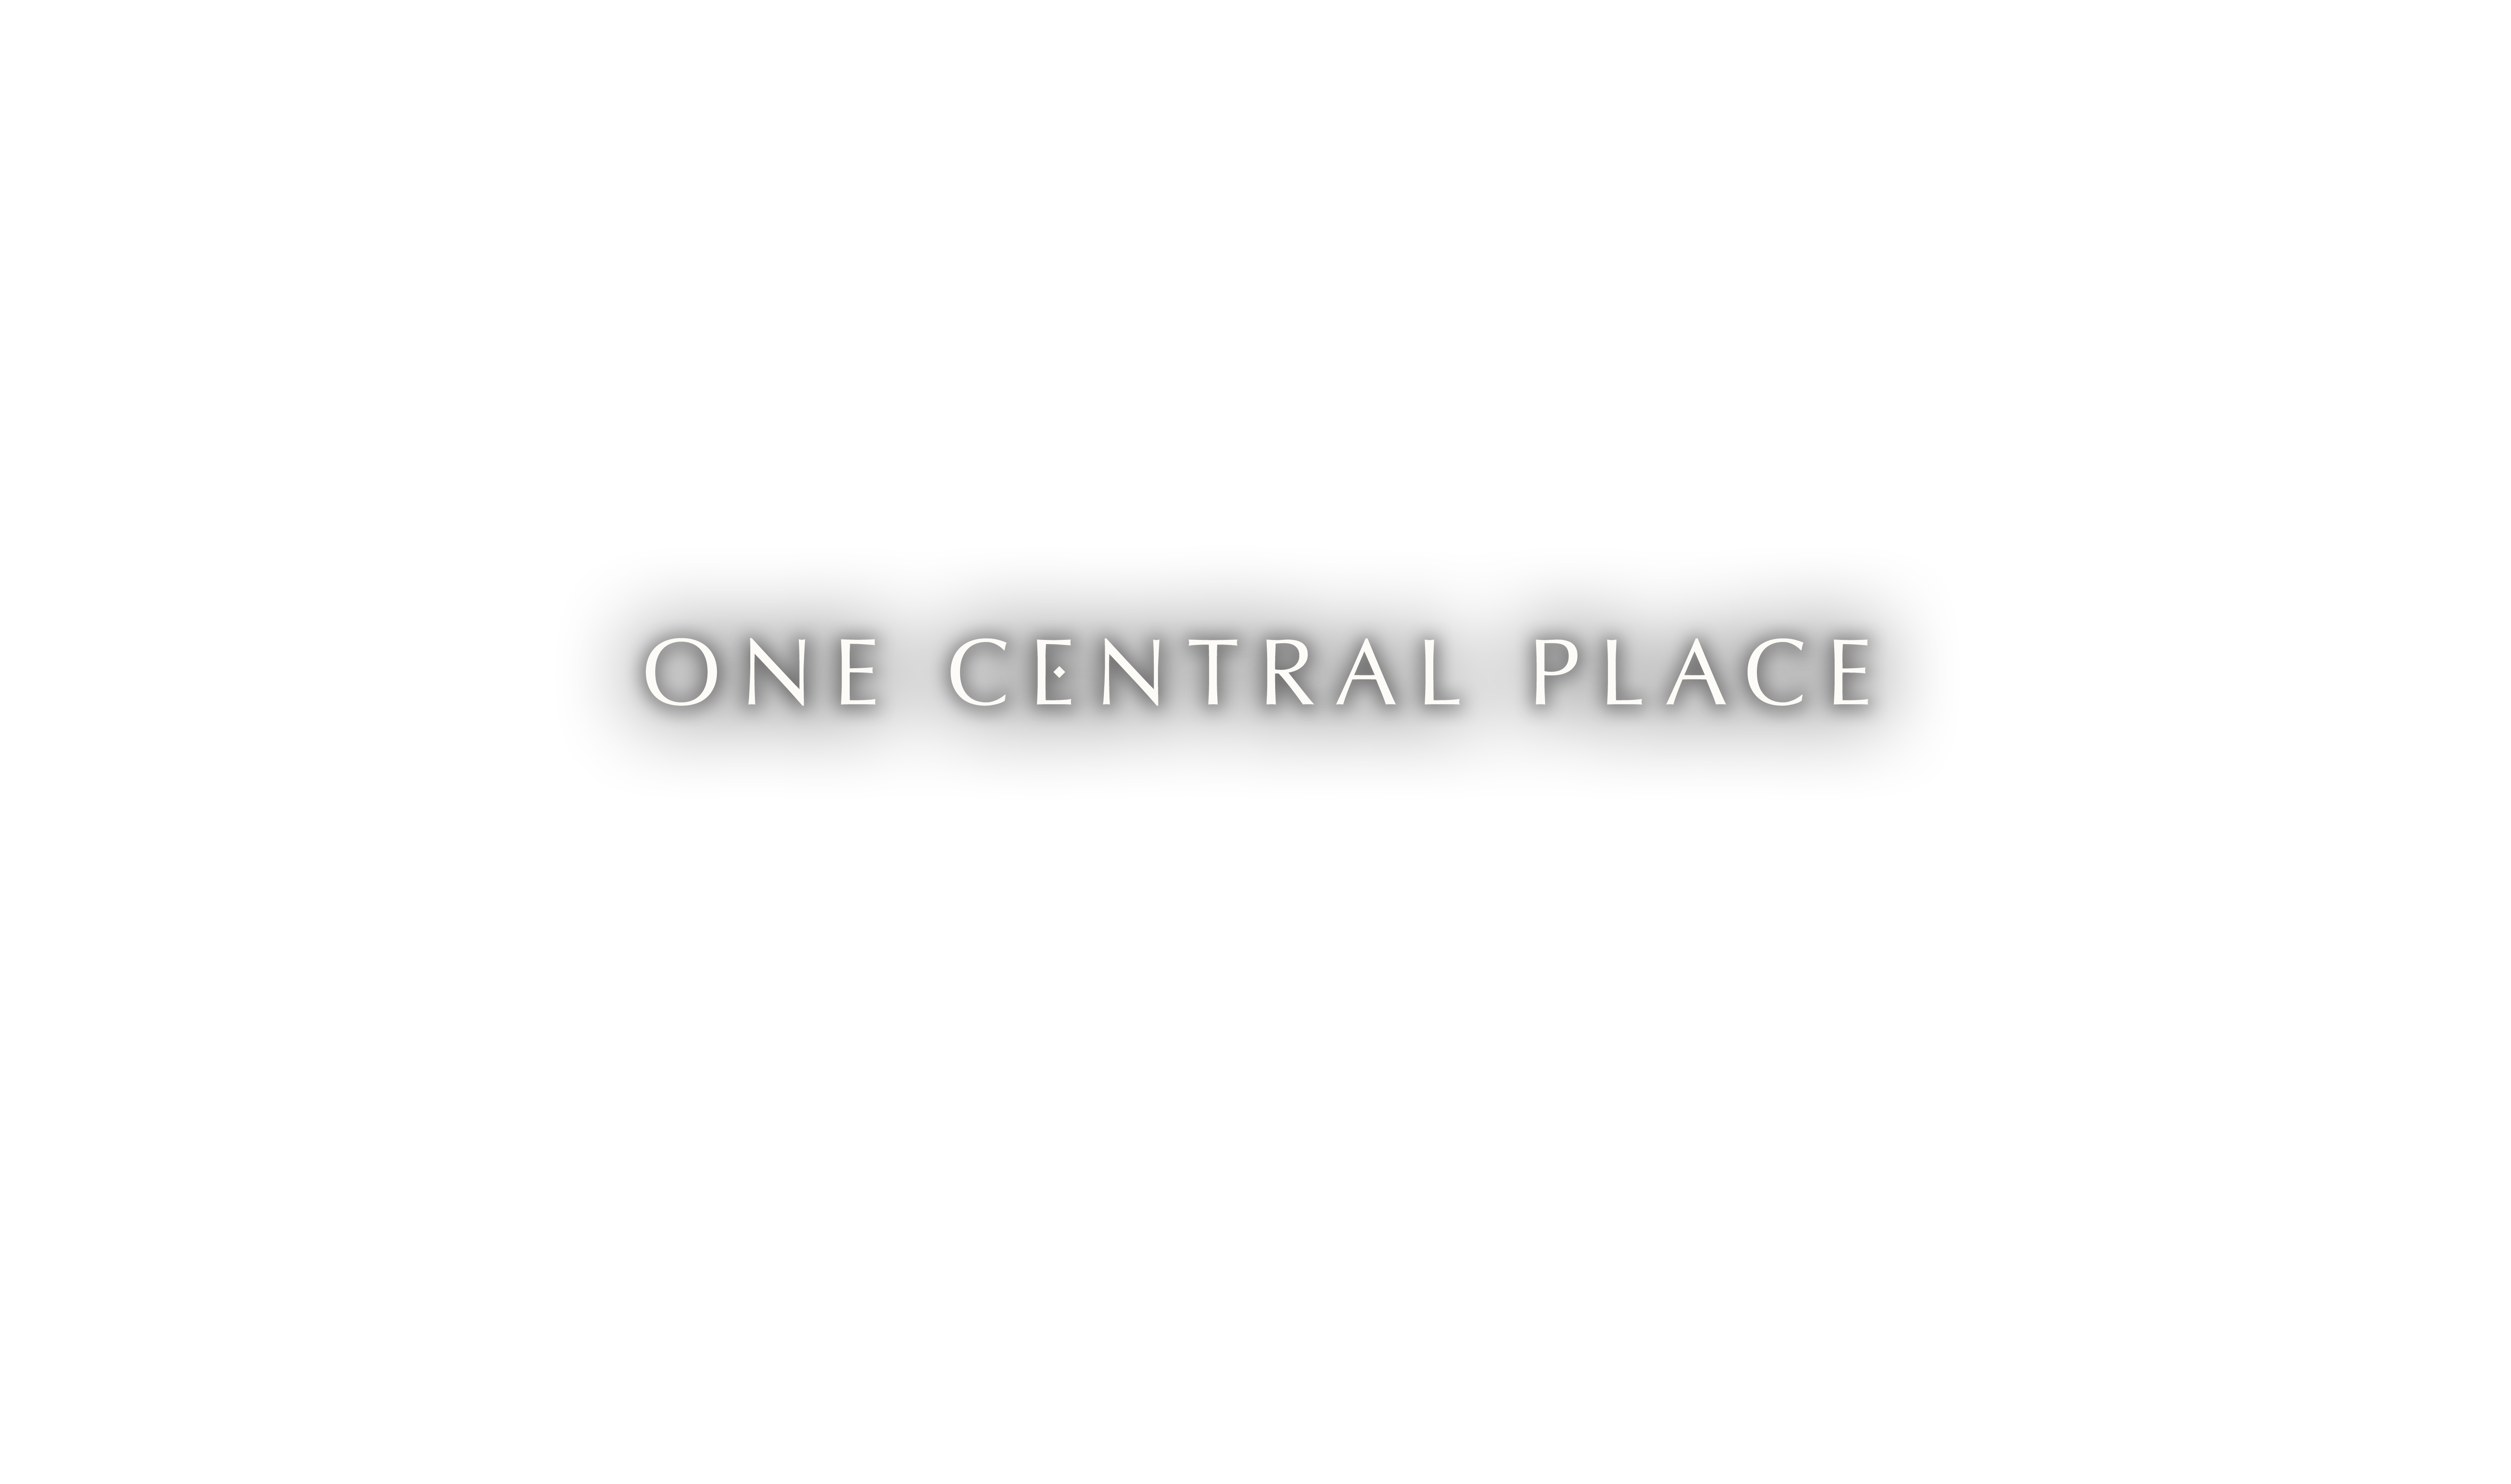 One Central Place